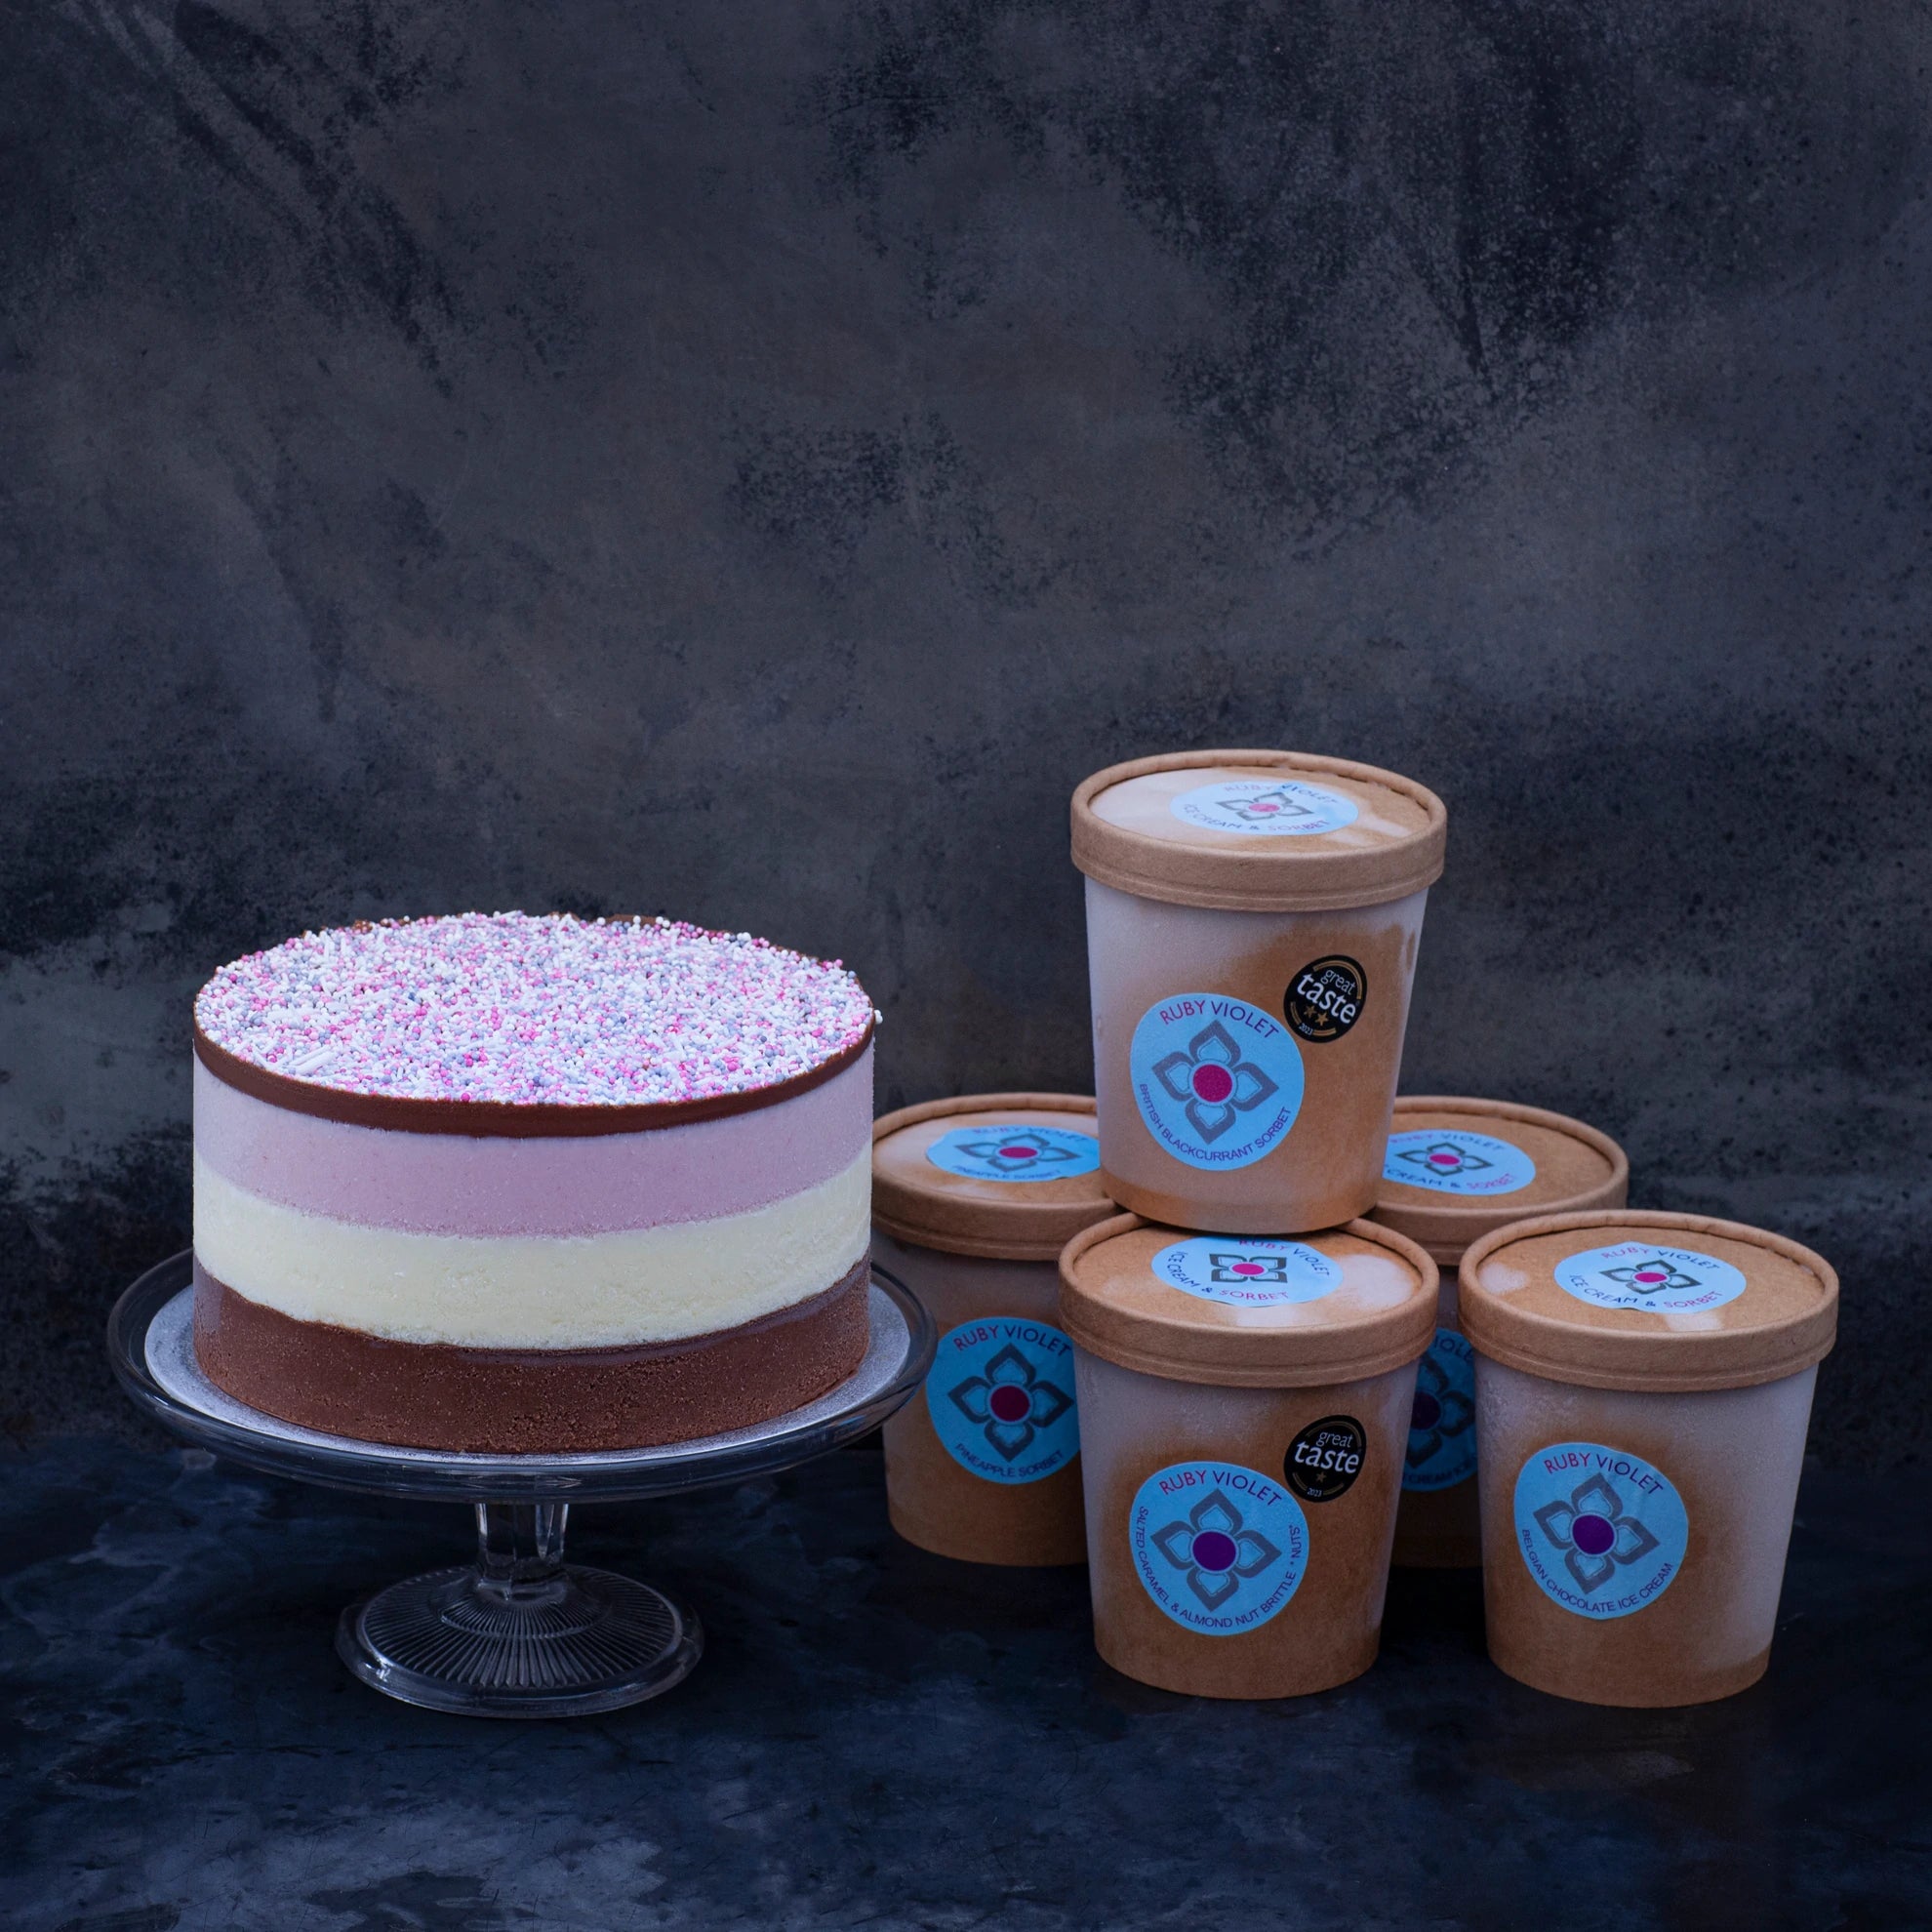 ICE COOL CREATIONS SUBSCRIPTION - Ruby Violet Ice Cream & Sorbet